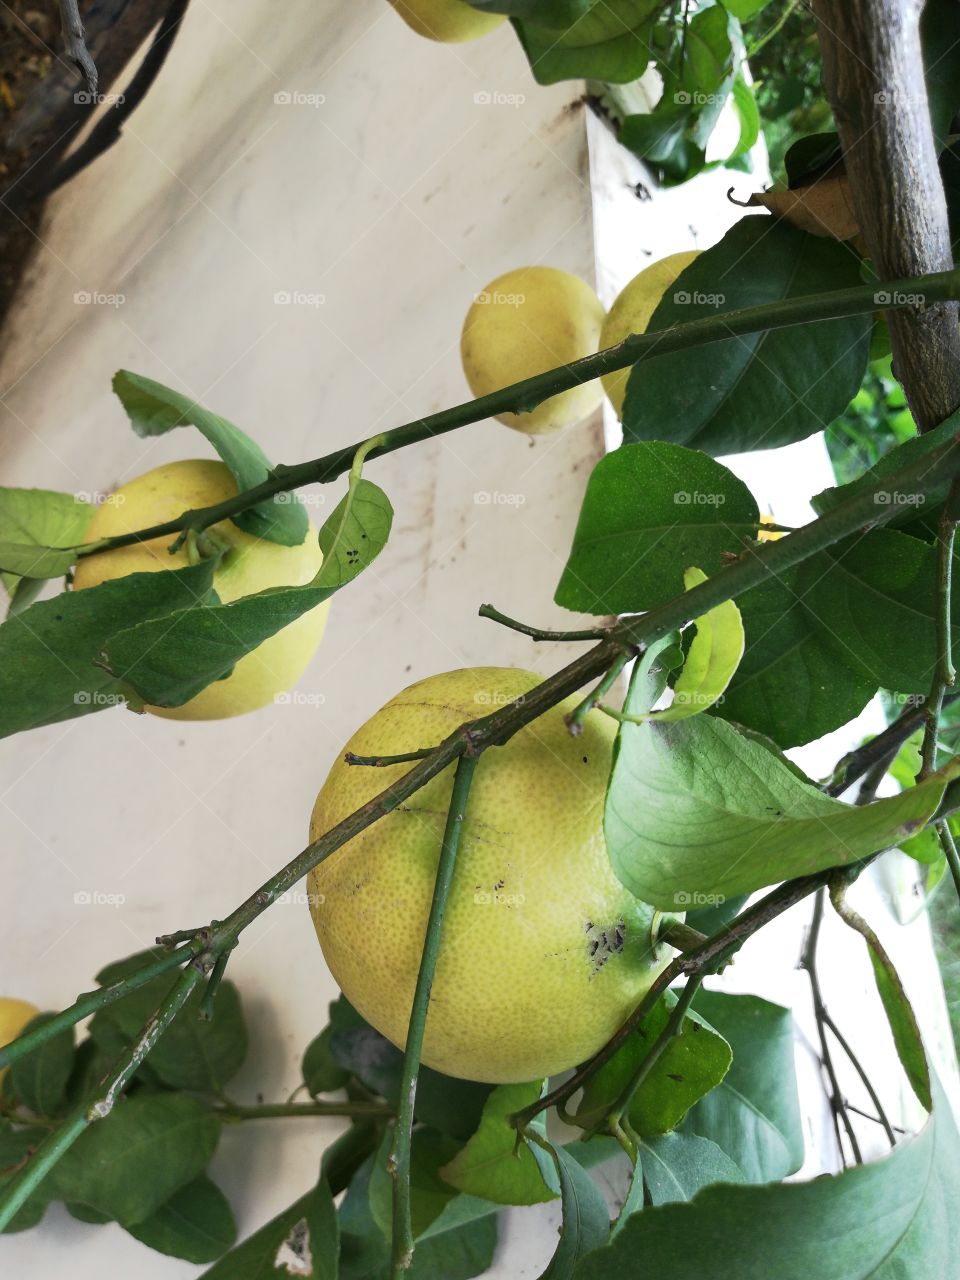 Yellow lemons on a branch of a tree